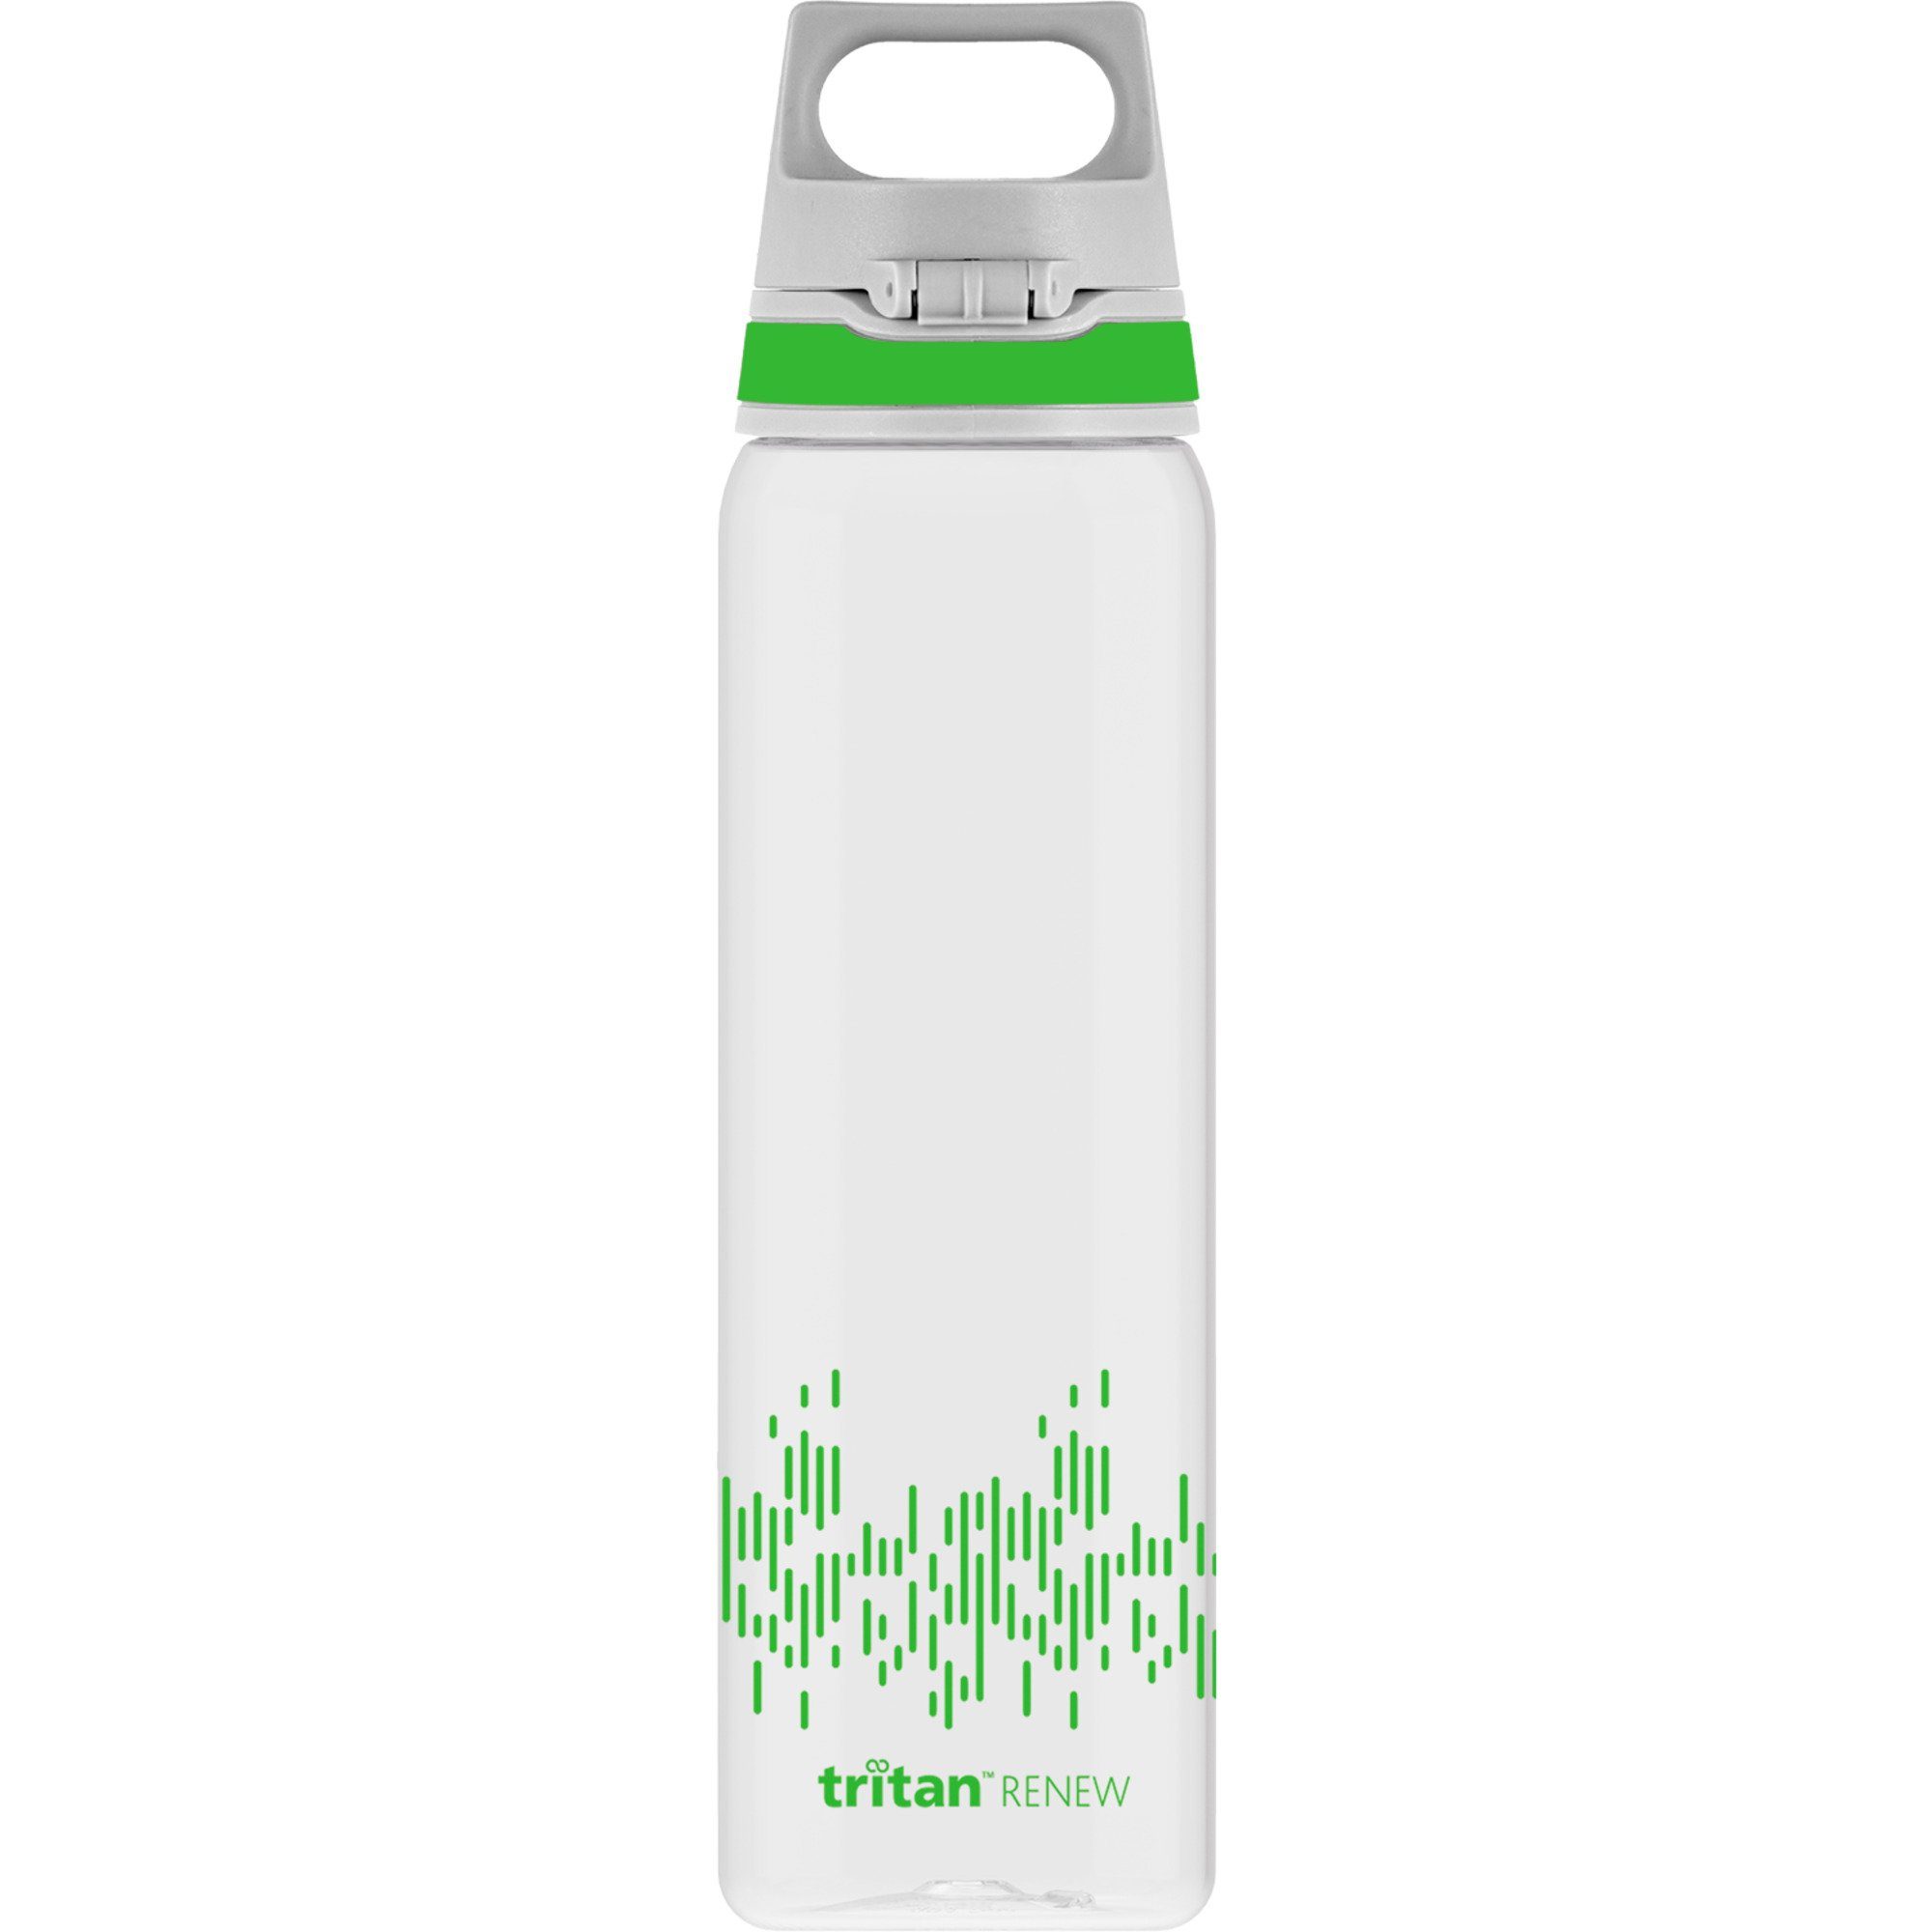 MyPlanet One Sigg "Green" Trinkflasche Total SIGG Trinkflasche Clear